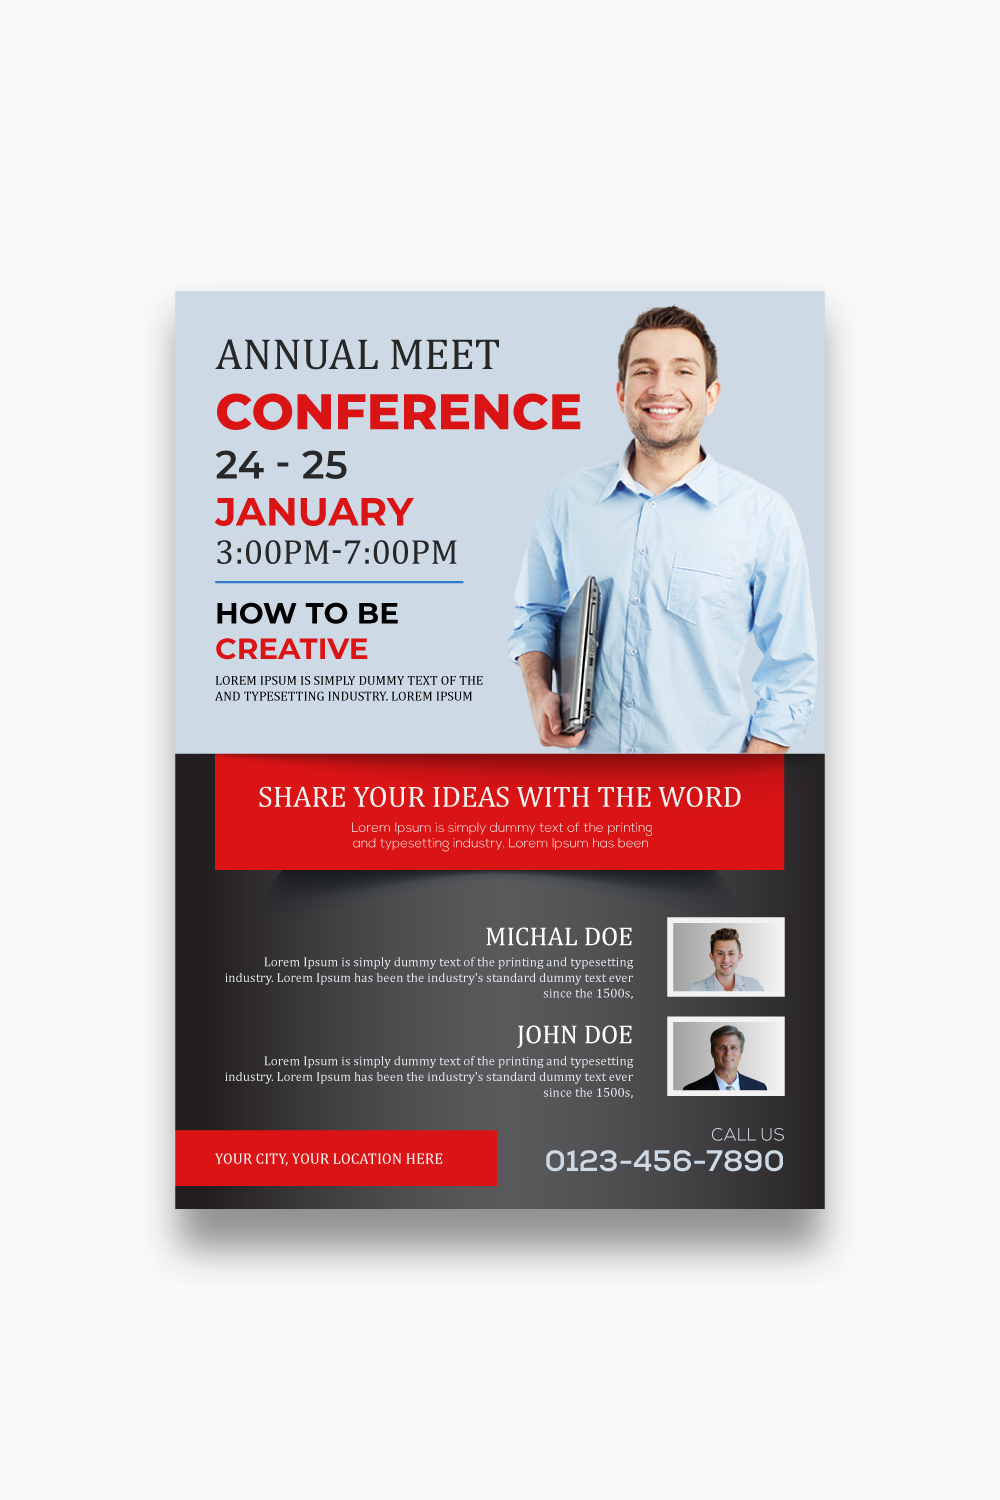 annual meet conference flyer template pinterest preview image.